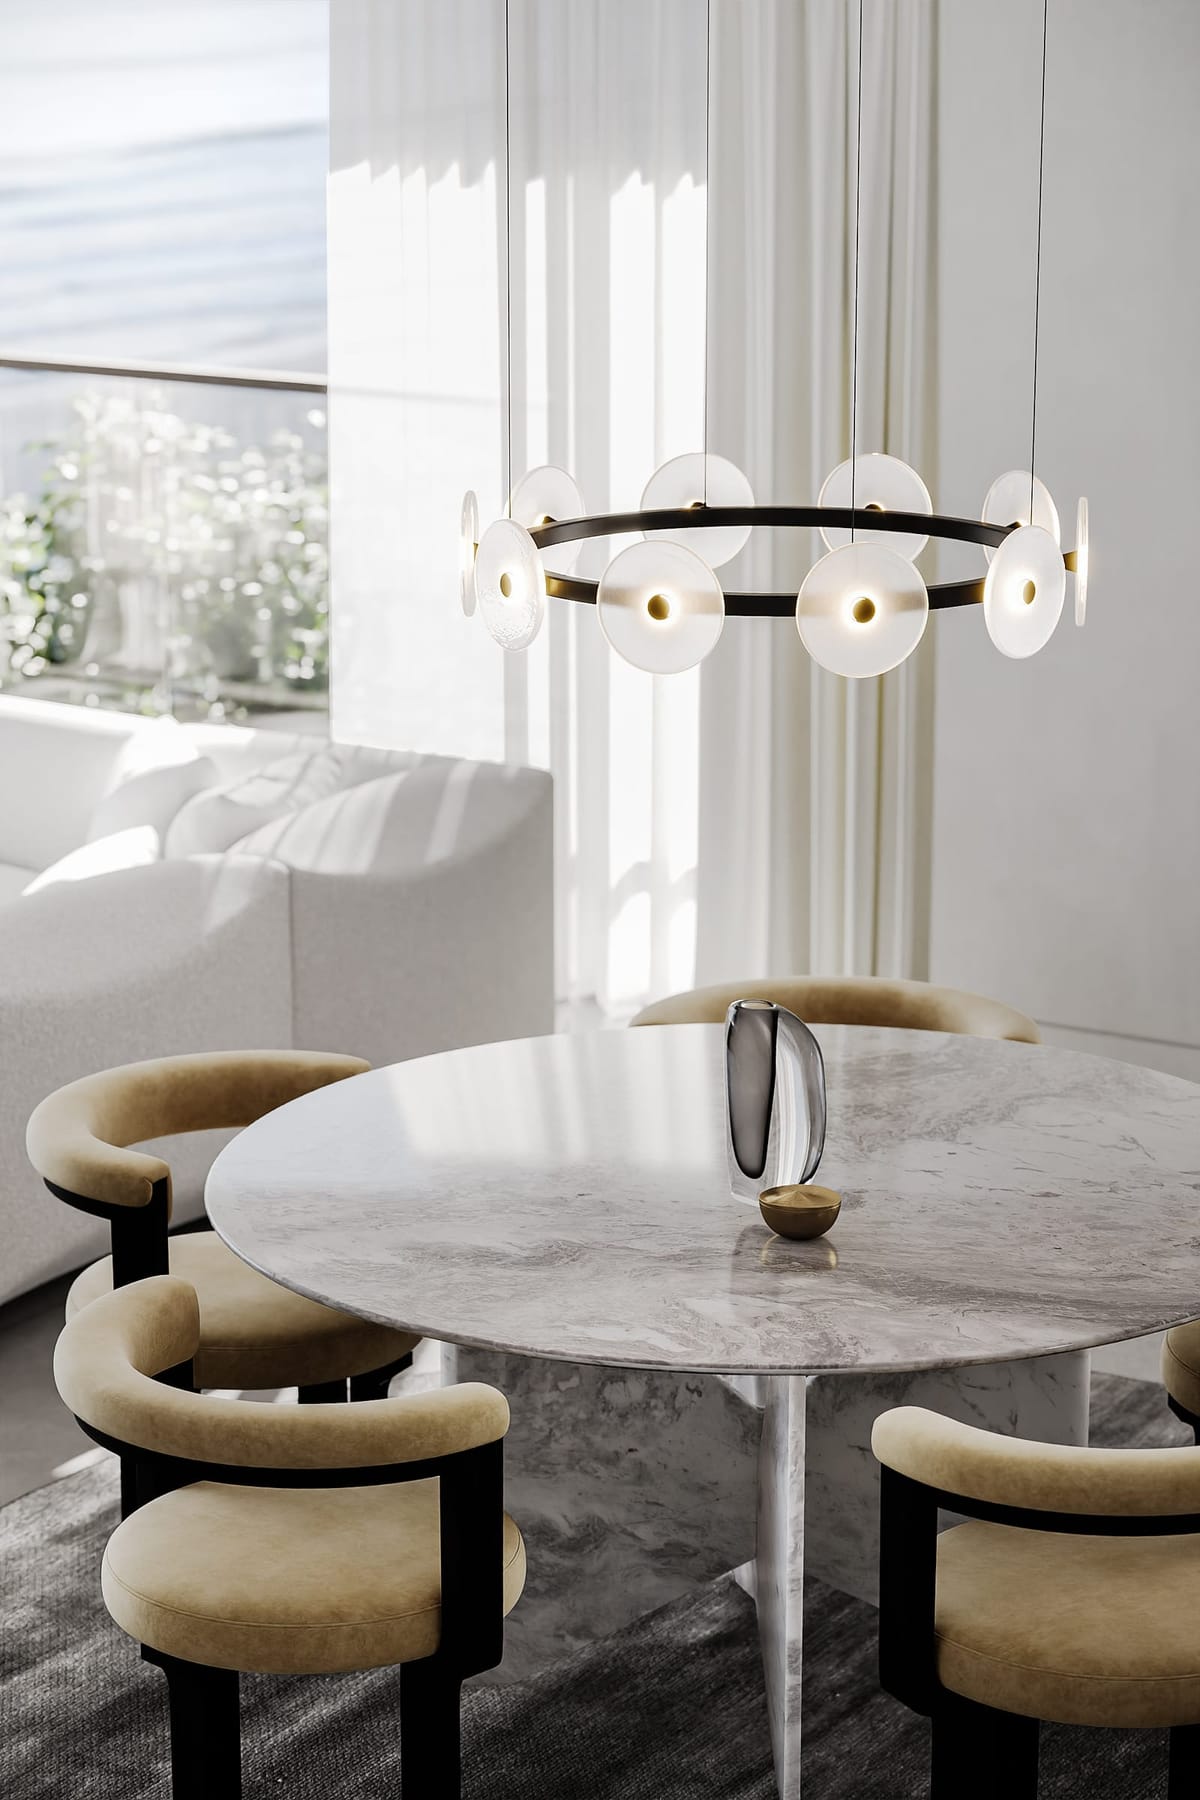 Circular ring light with glass circle lights hanging on gold ring. Marble dining table underneath light. 